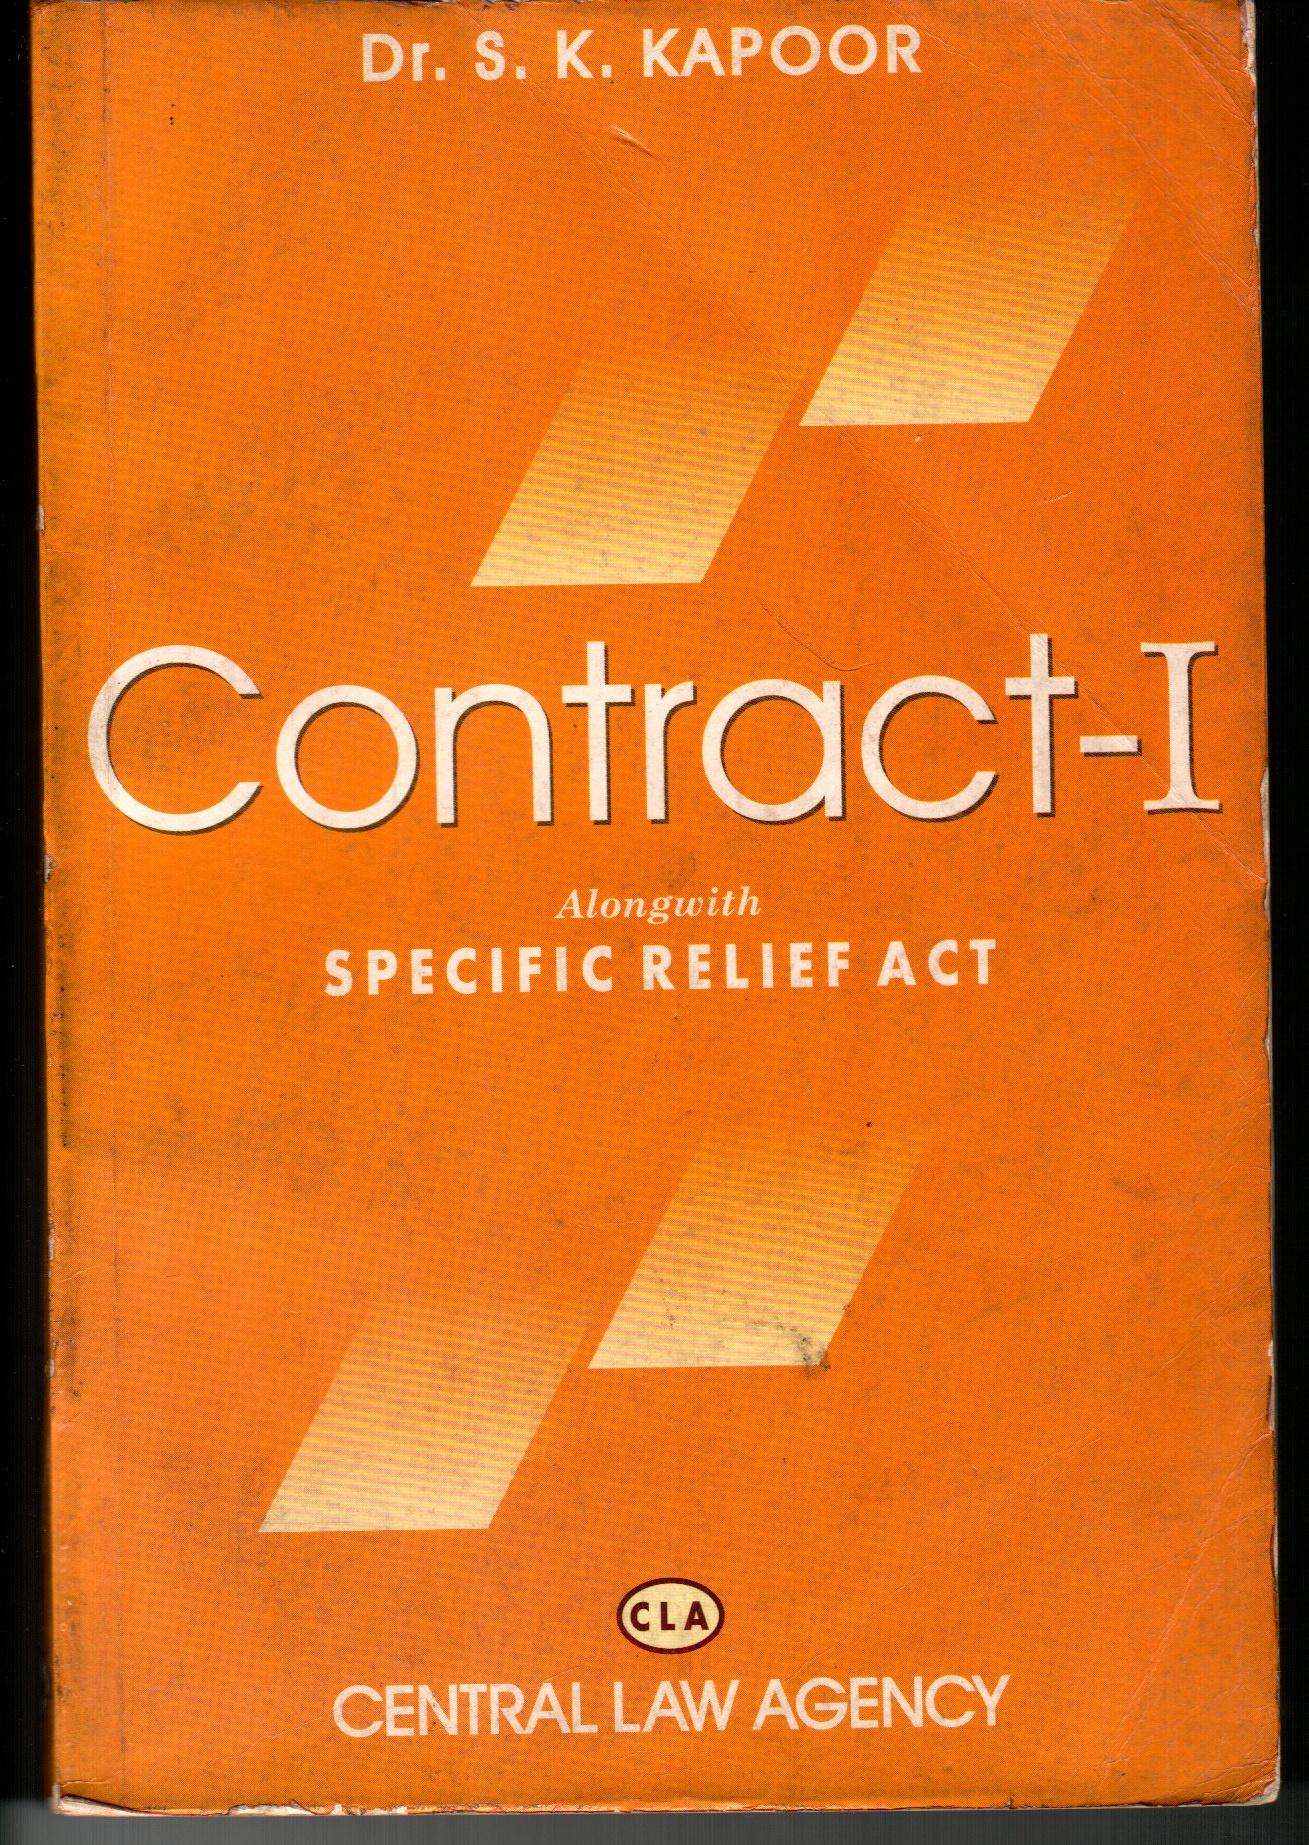 Contract -I